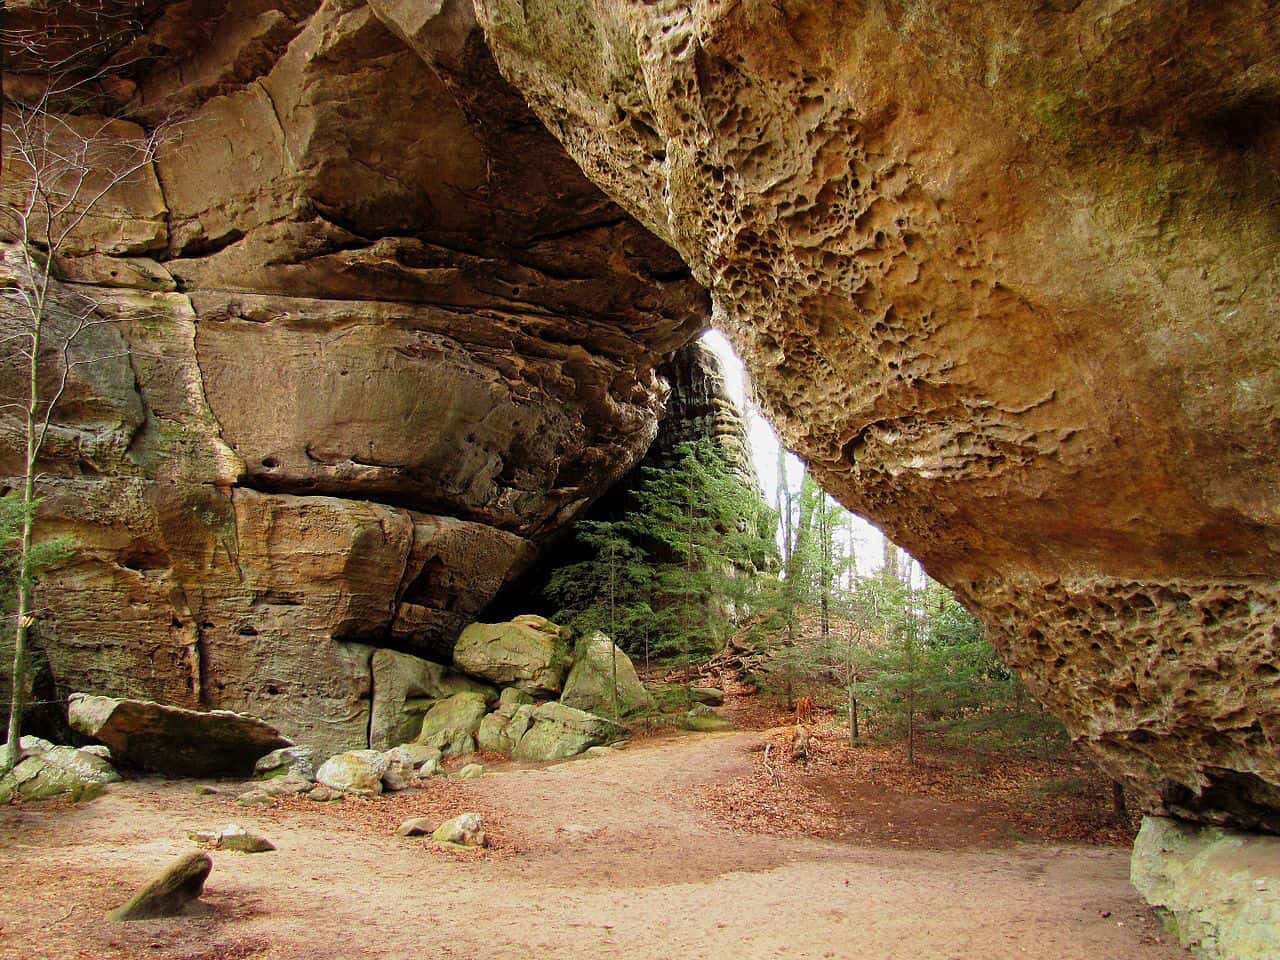 south arch, Tennessee, 